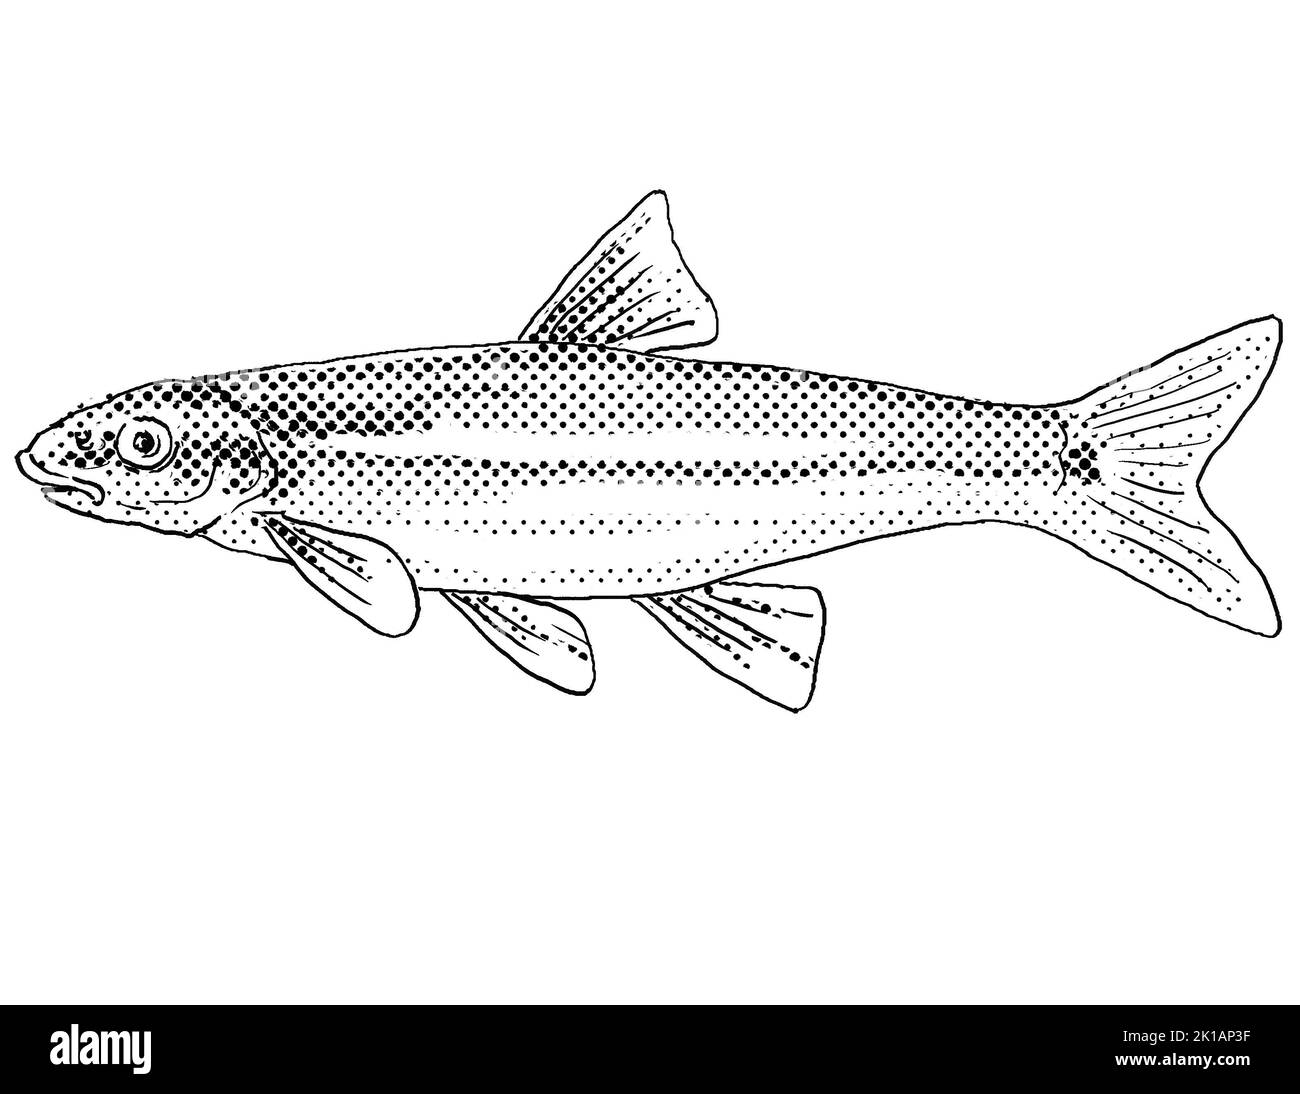 Cartoon style line drawing of a longnose dace or Rhinichthys cataractae a freshwater fish endemic to North America with halftone dots shading on isola Stock Photo